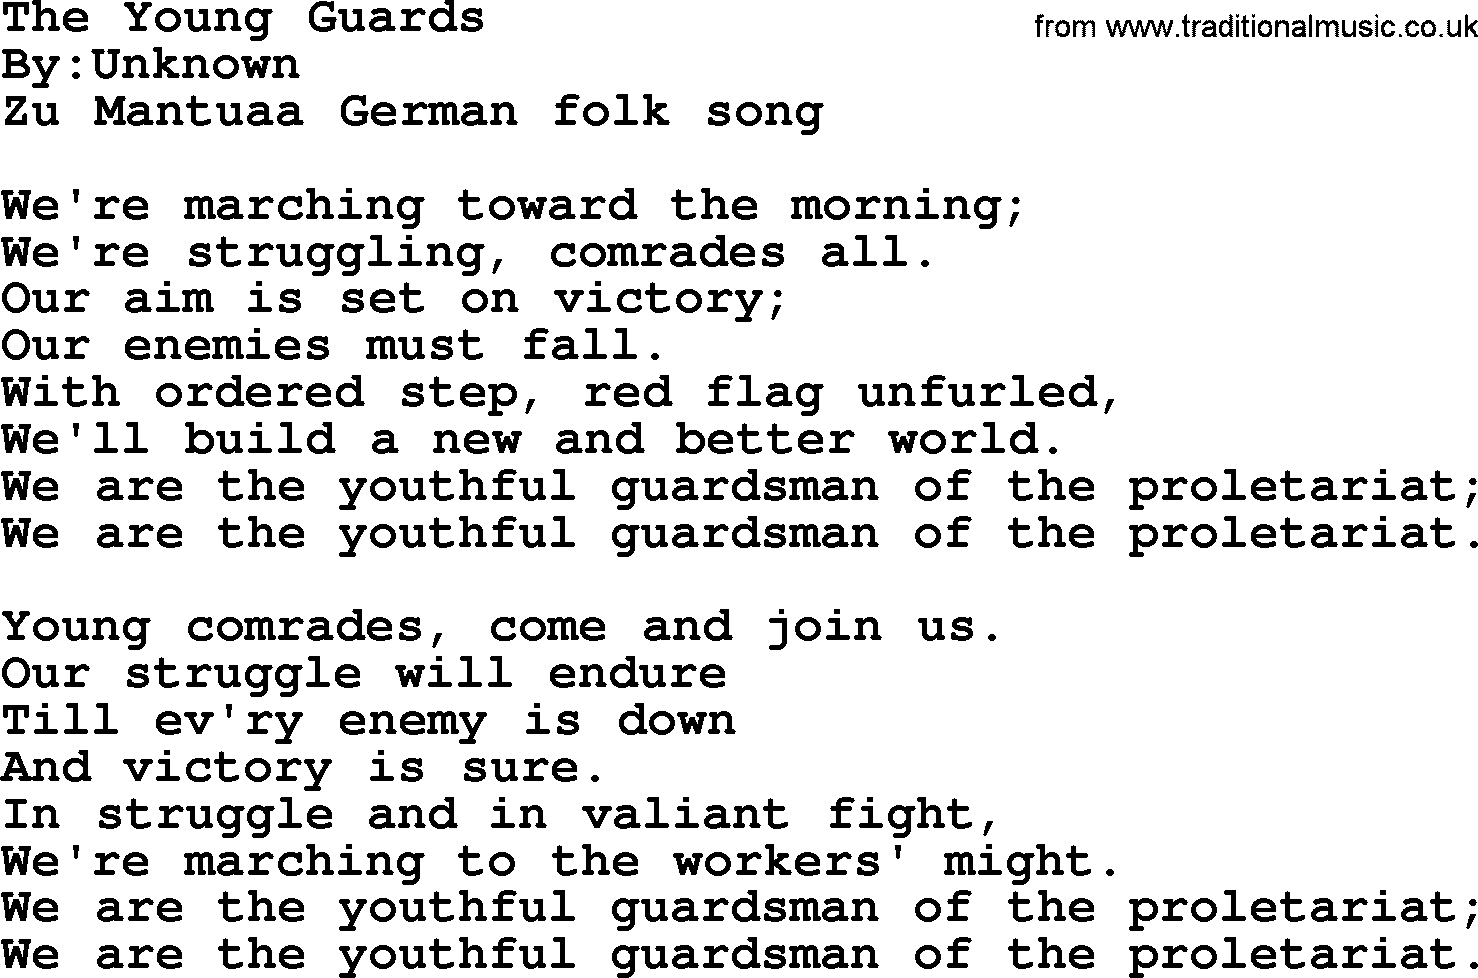 Political, Solidarity, Workers or Union song: The Young Guards, lyrics